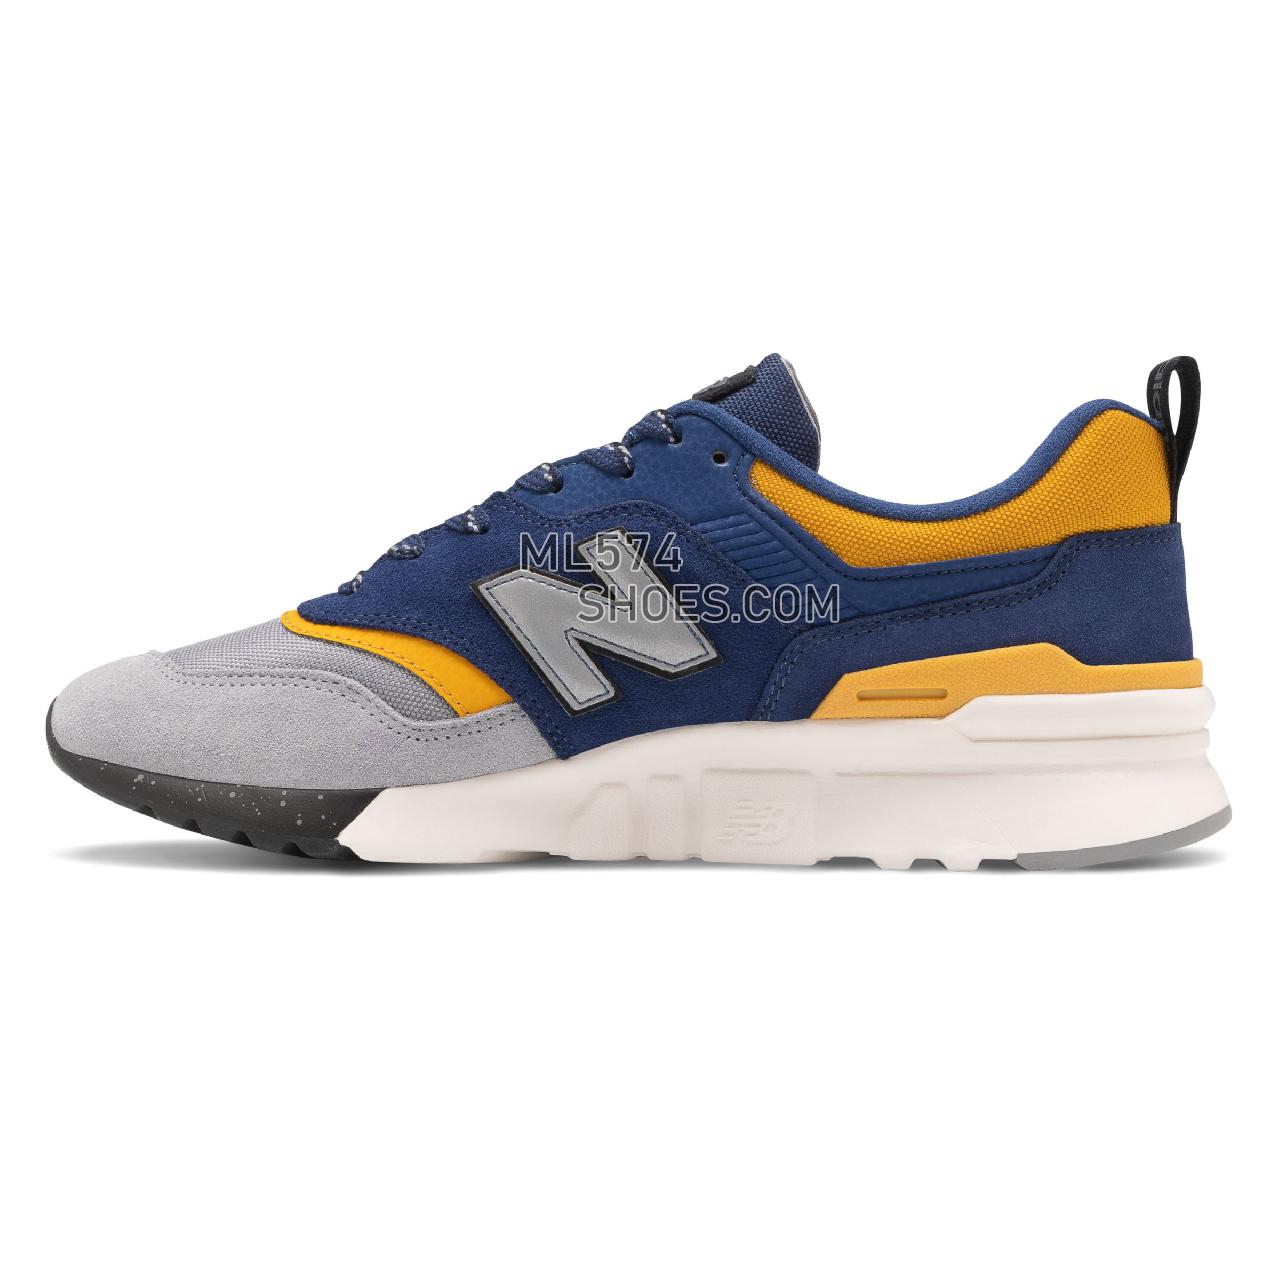 New Balance 997H - Men's Classic Sneakers - Techtonic Blue with Steel - CM997HYR